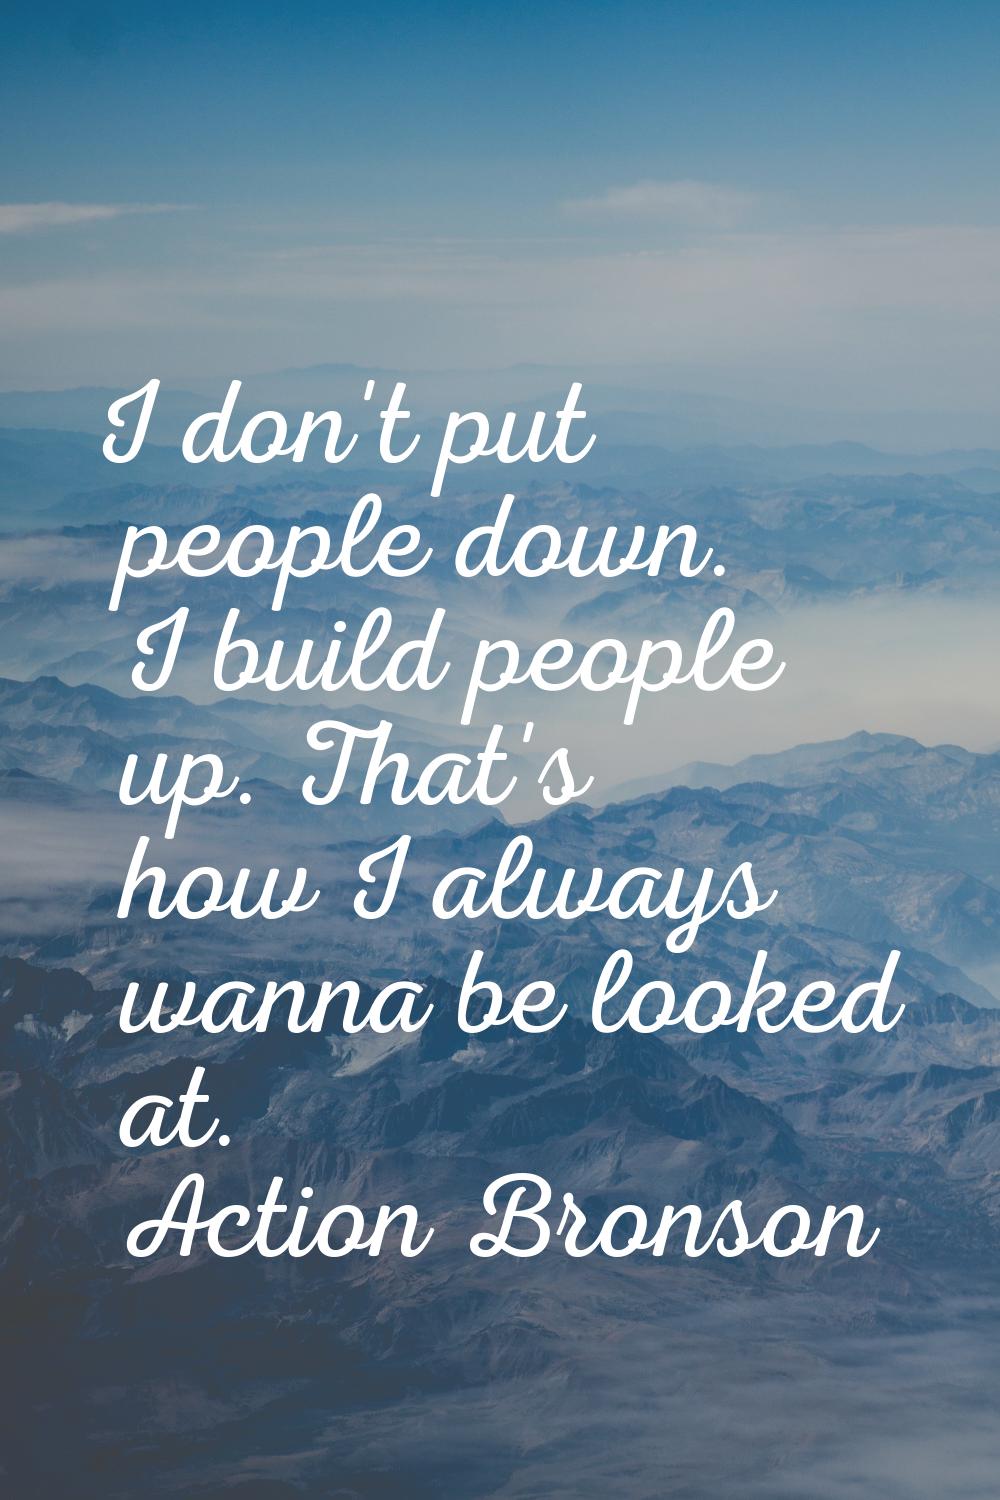 I don't put people down. I build people up. That's how I always wanna be looked at.